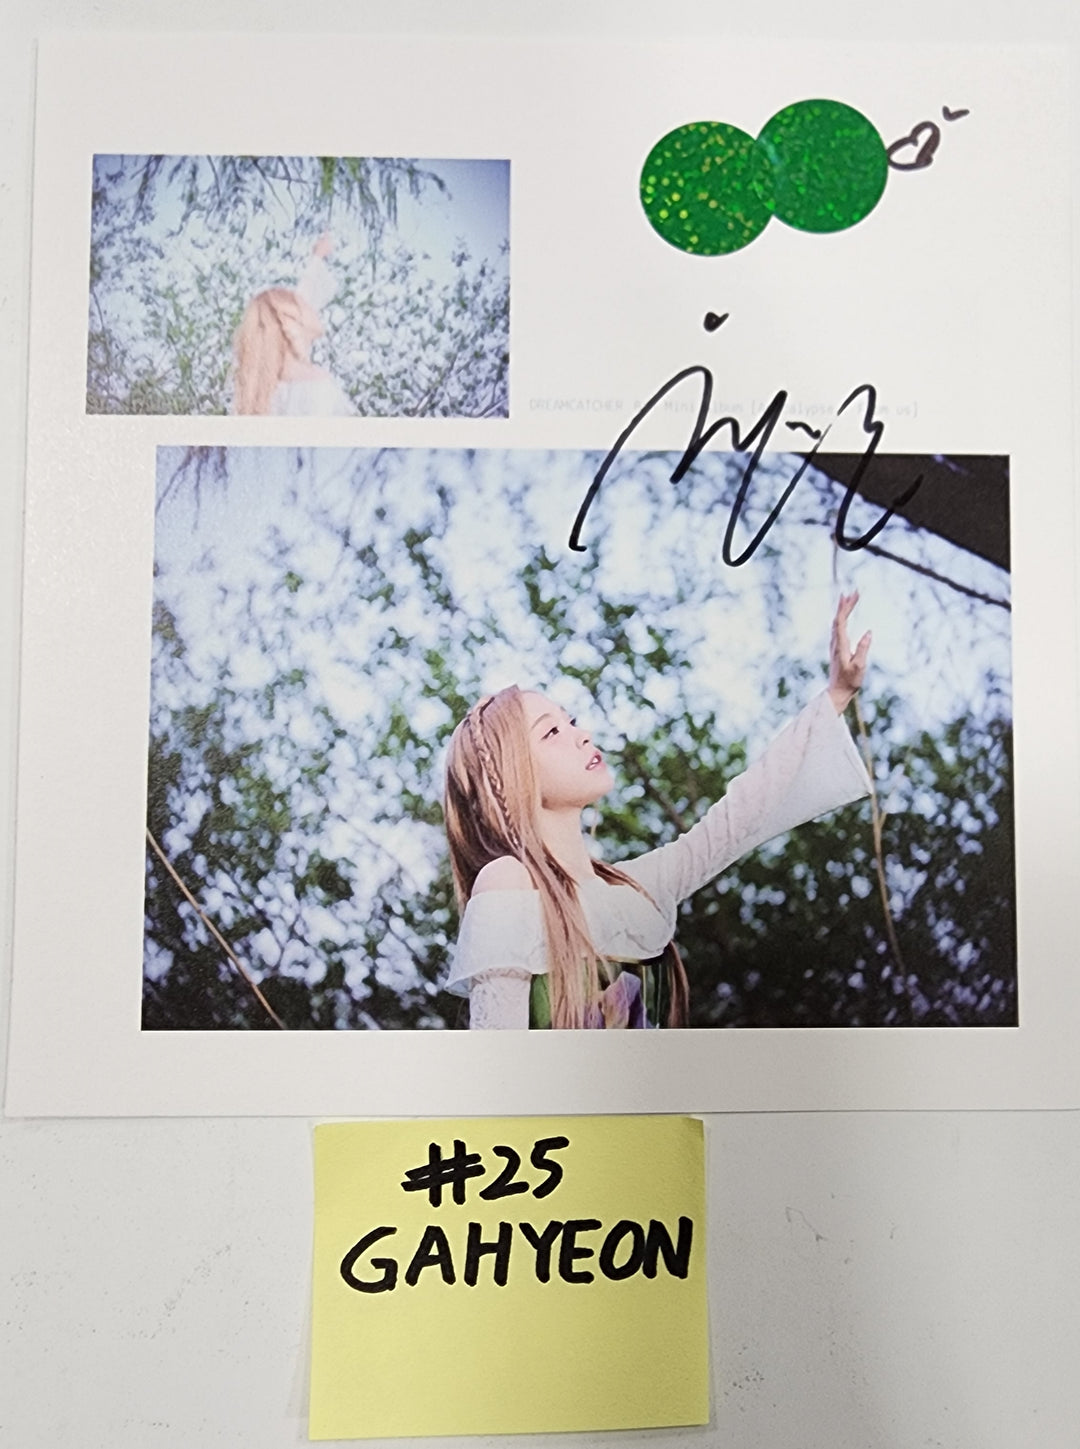 Dreamcatcher "Apocalypse : From us" - A Cut Page From Fansign Event Album